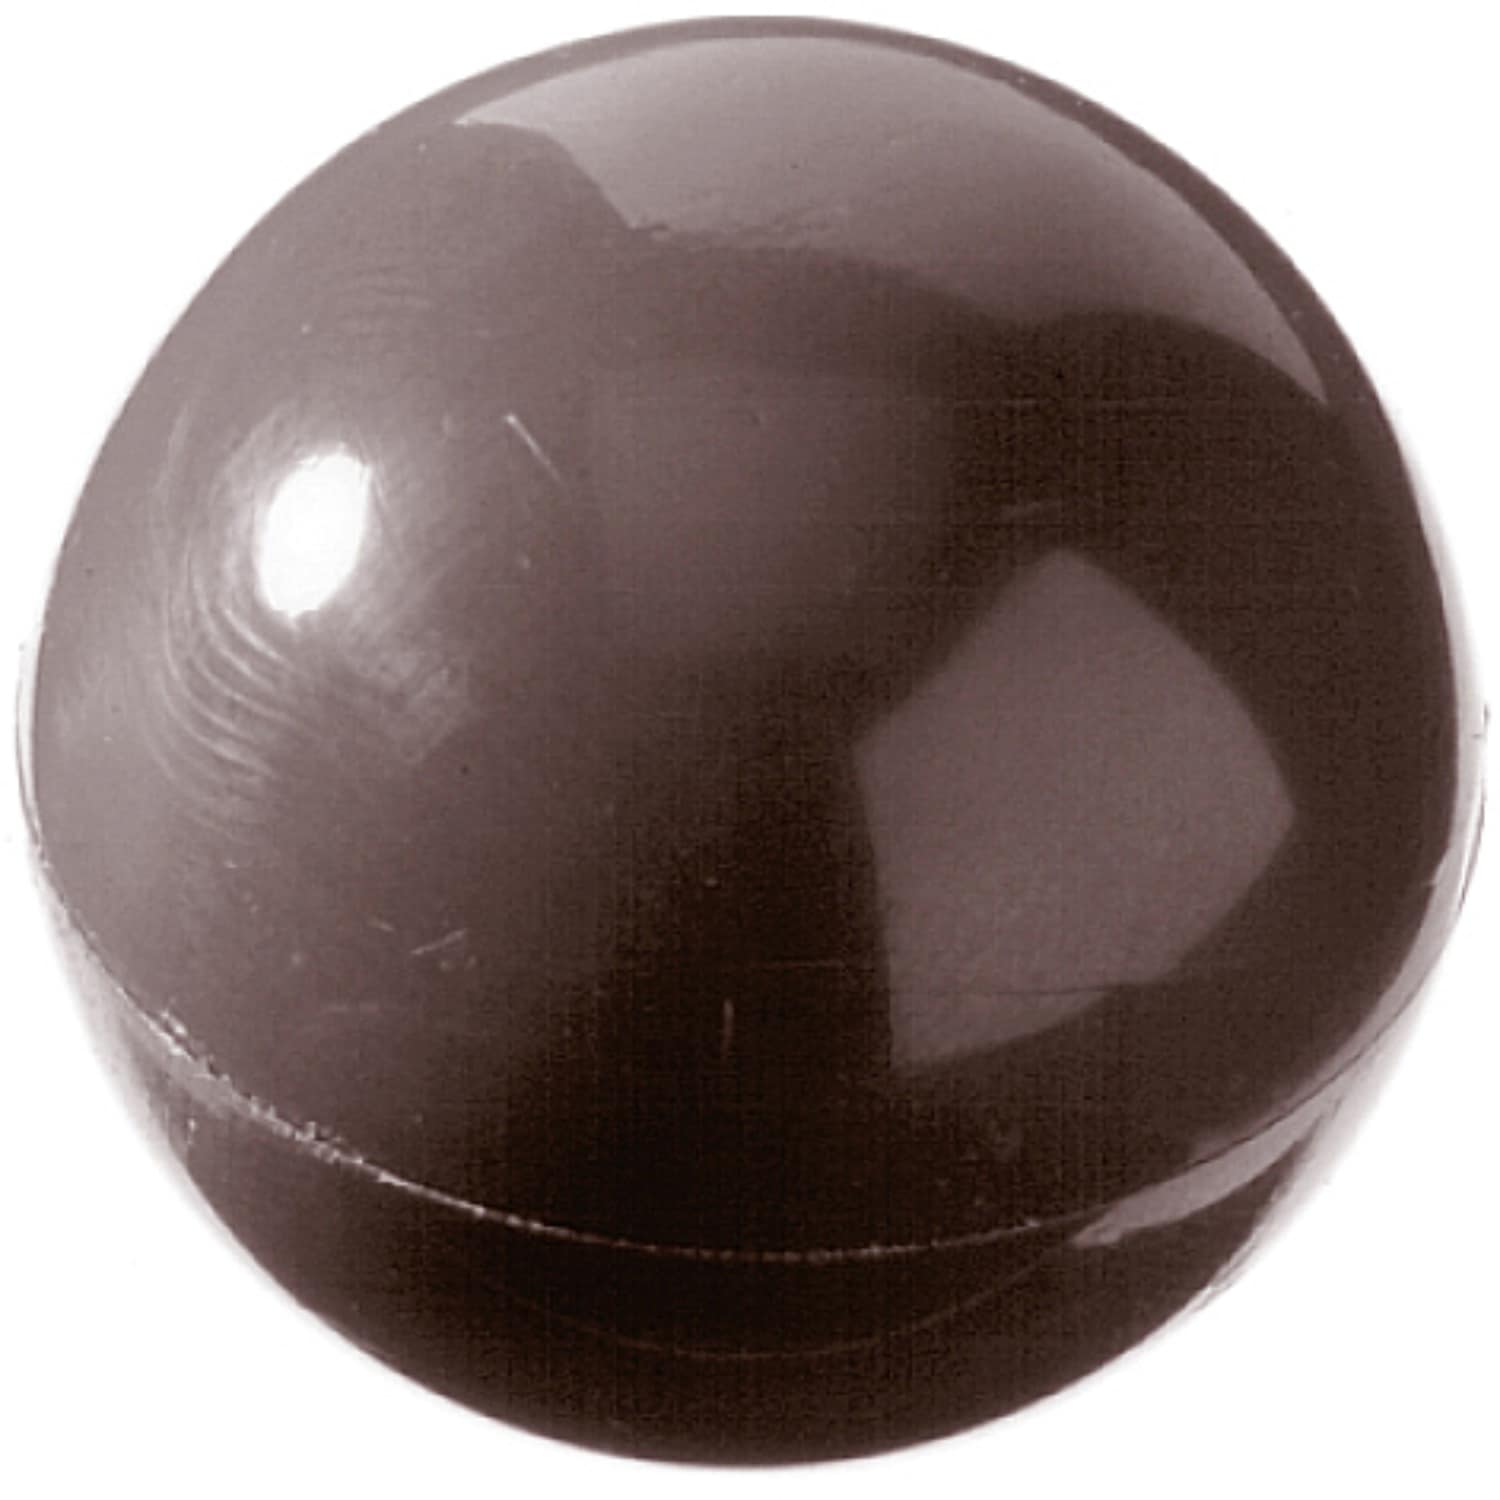 Chocolate mould "Sphere" 421217